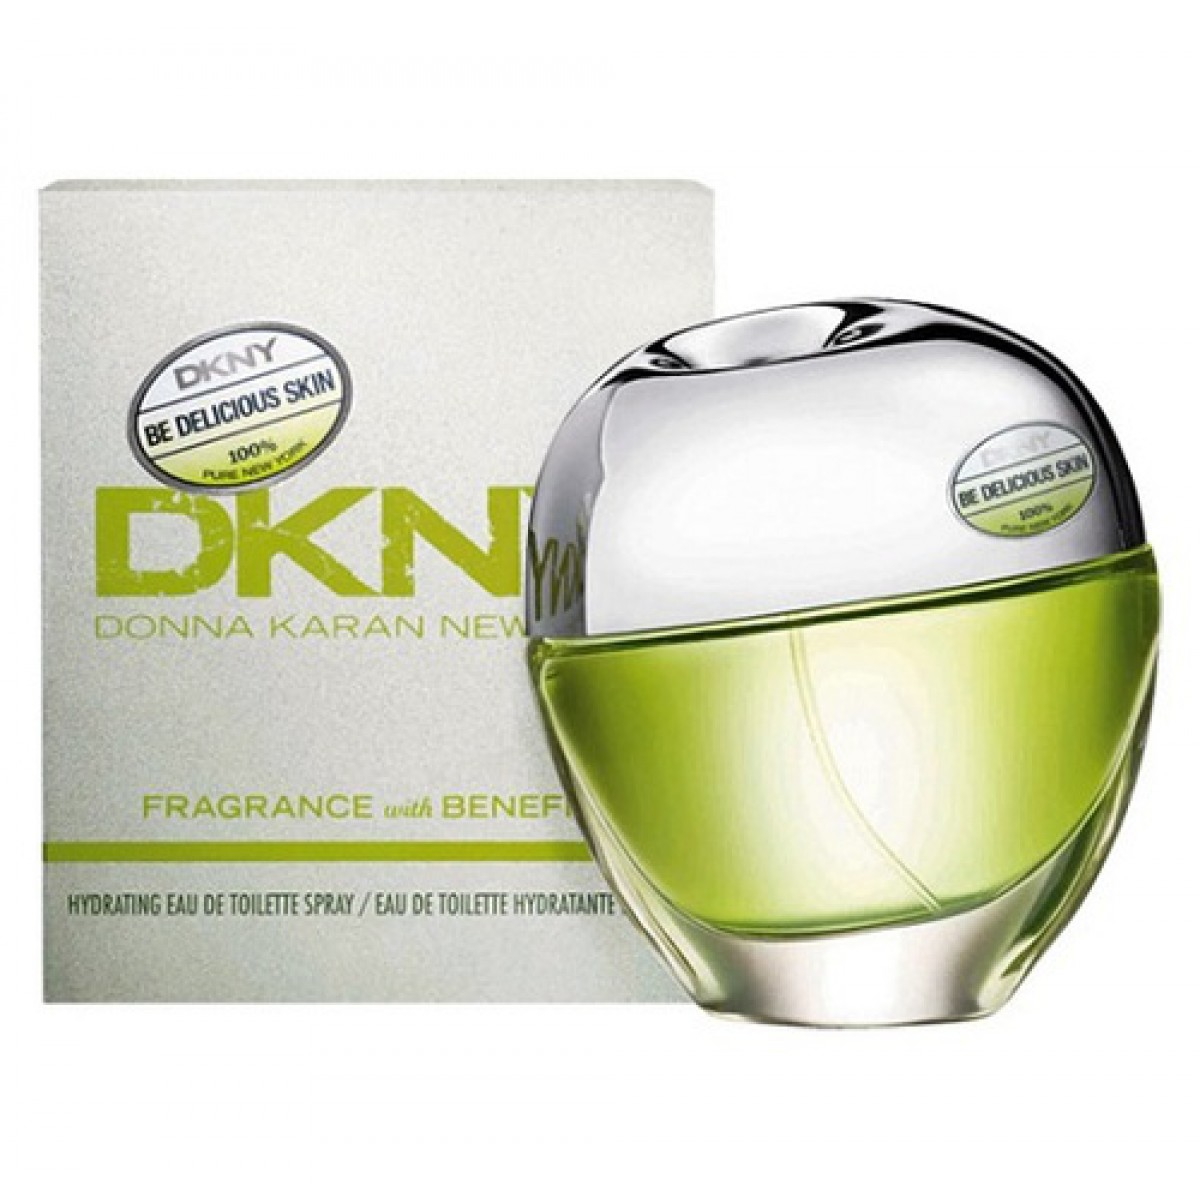 DKNY Be Delicious Skin Hydrating